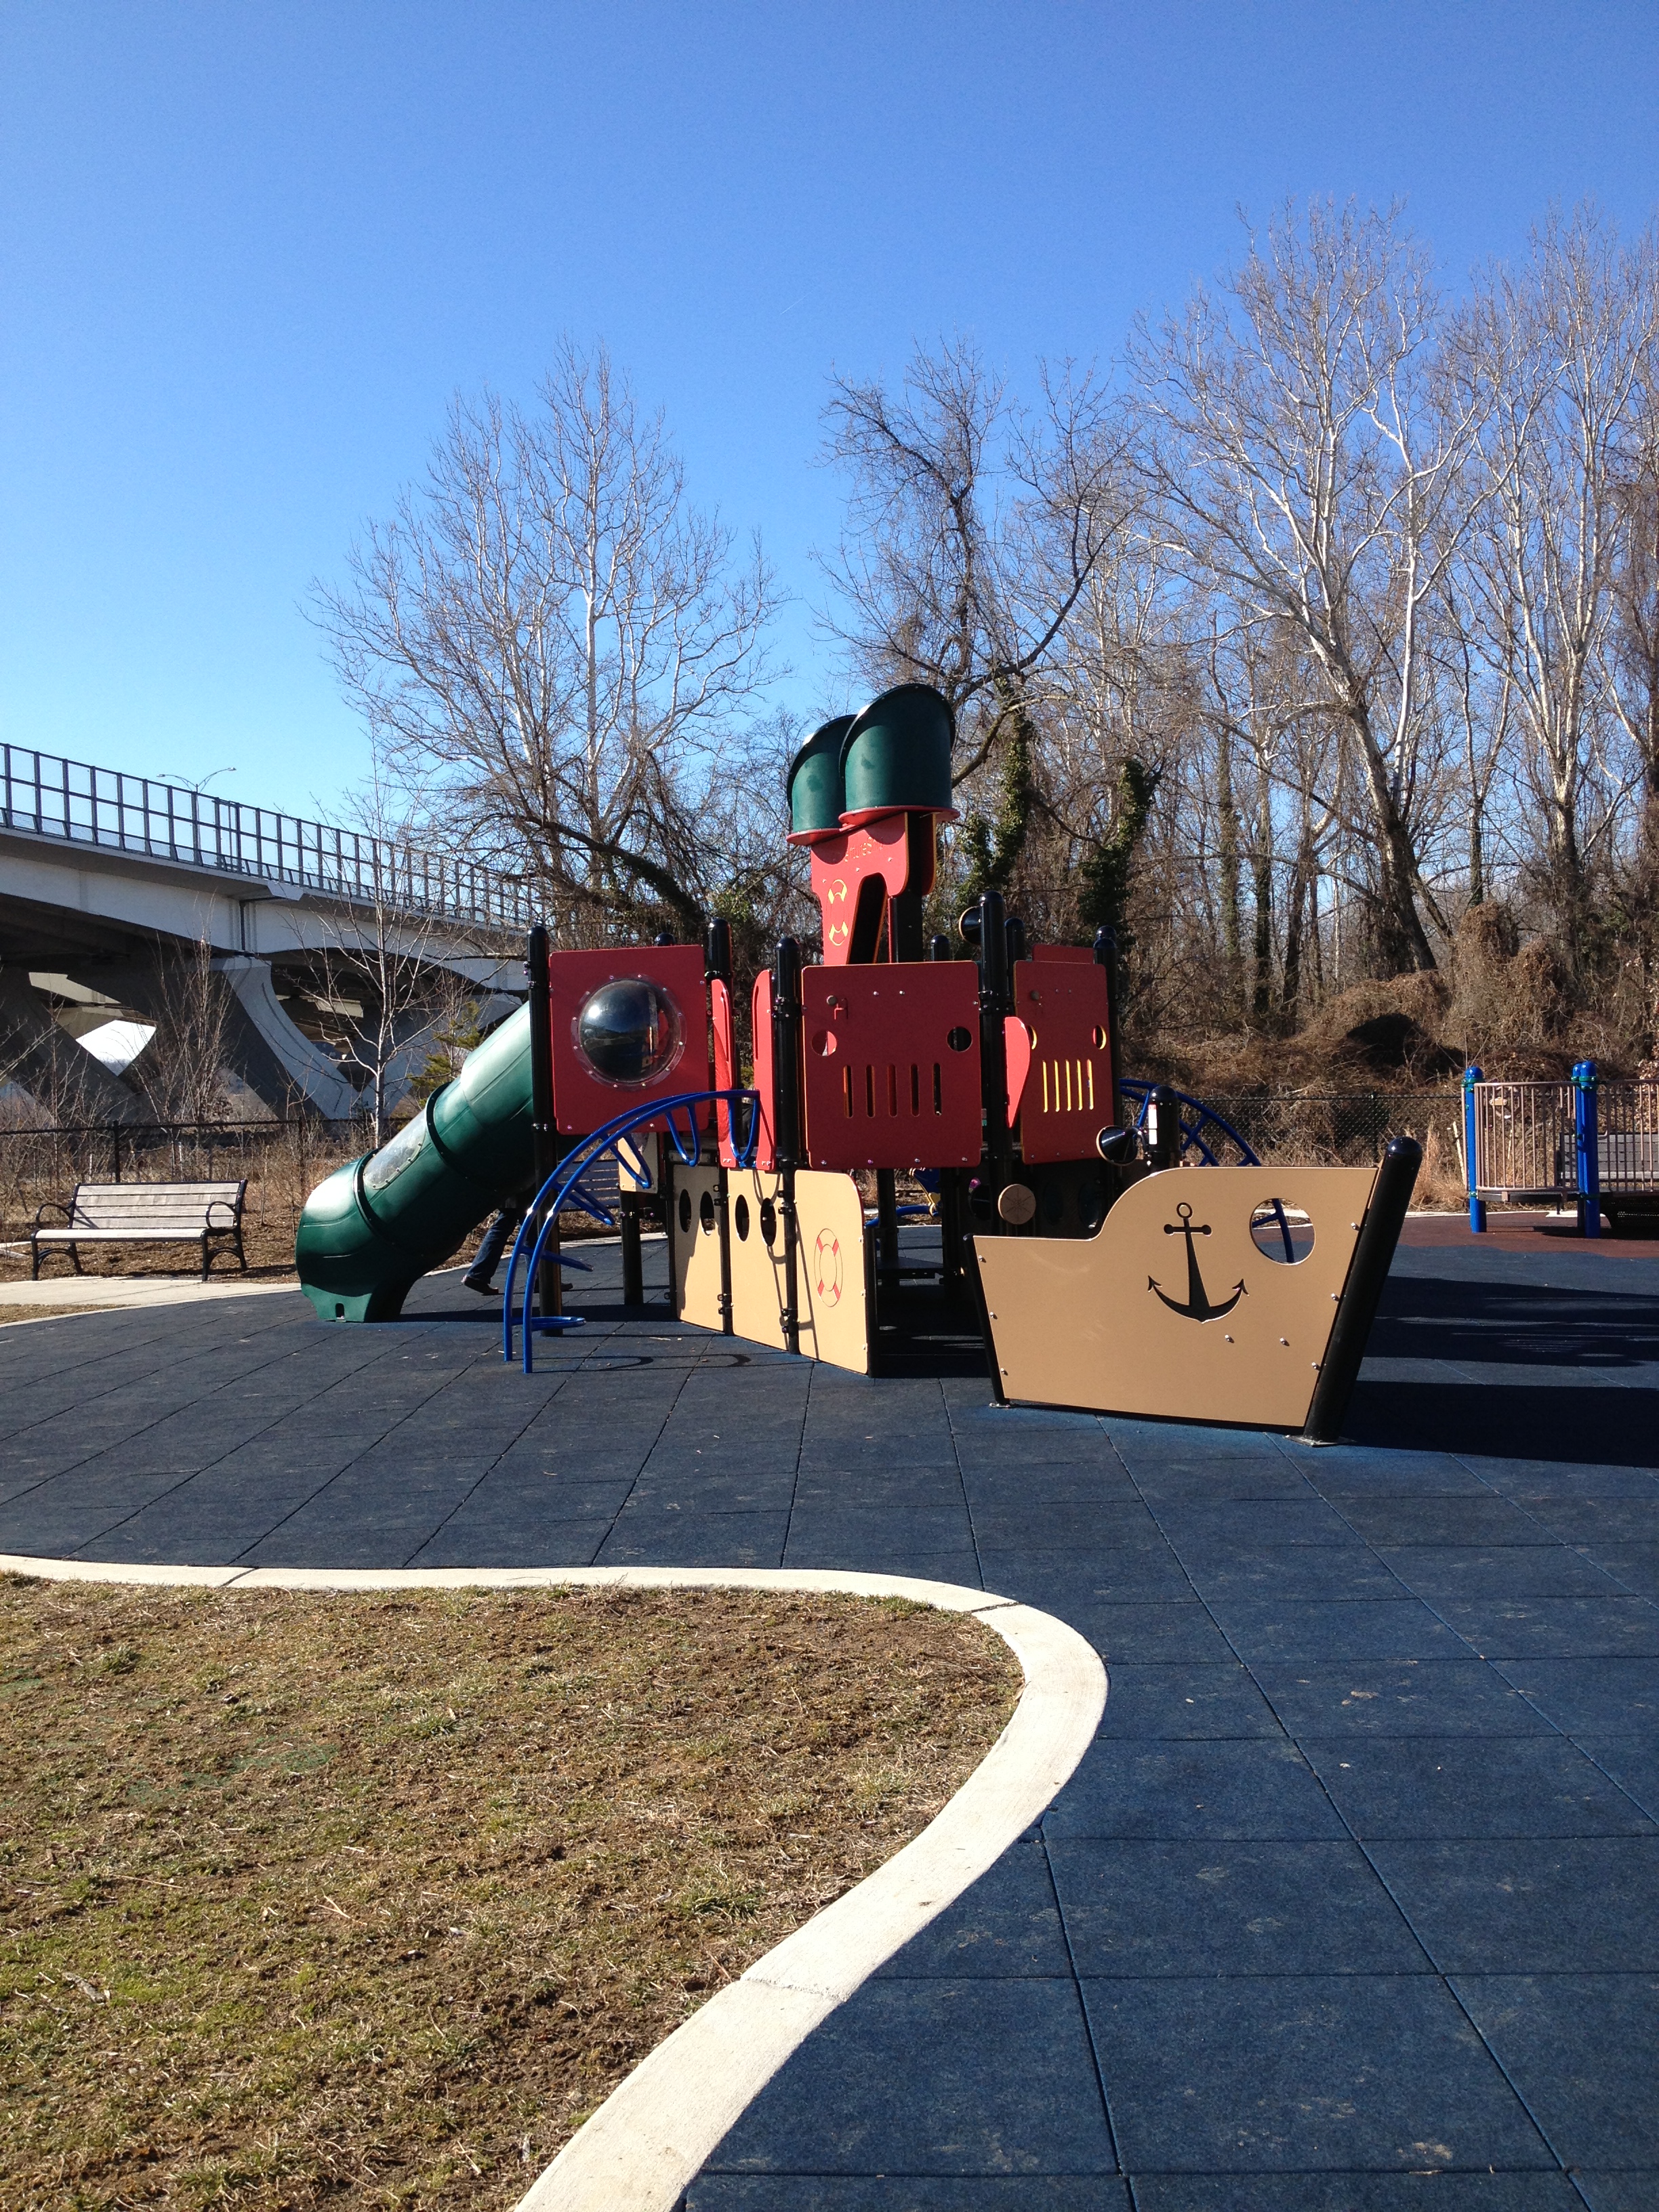 Pirate Ship play structure at Jones Point Park